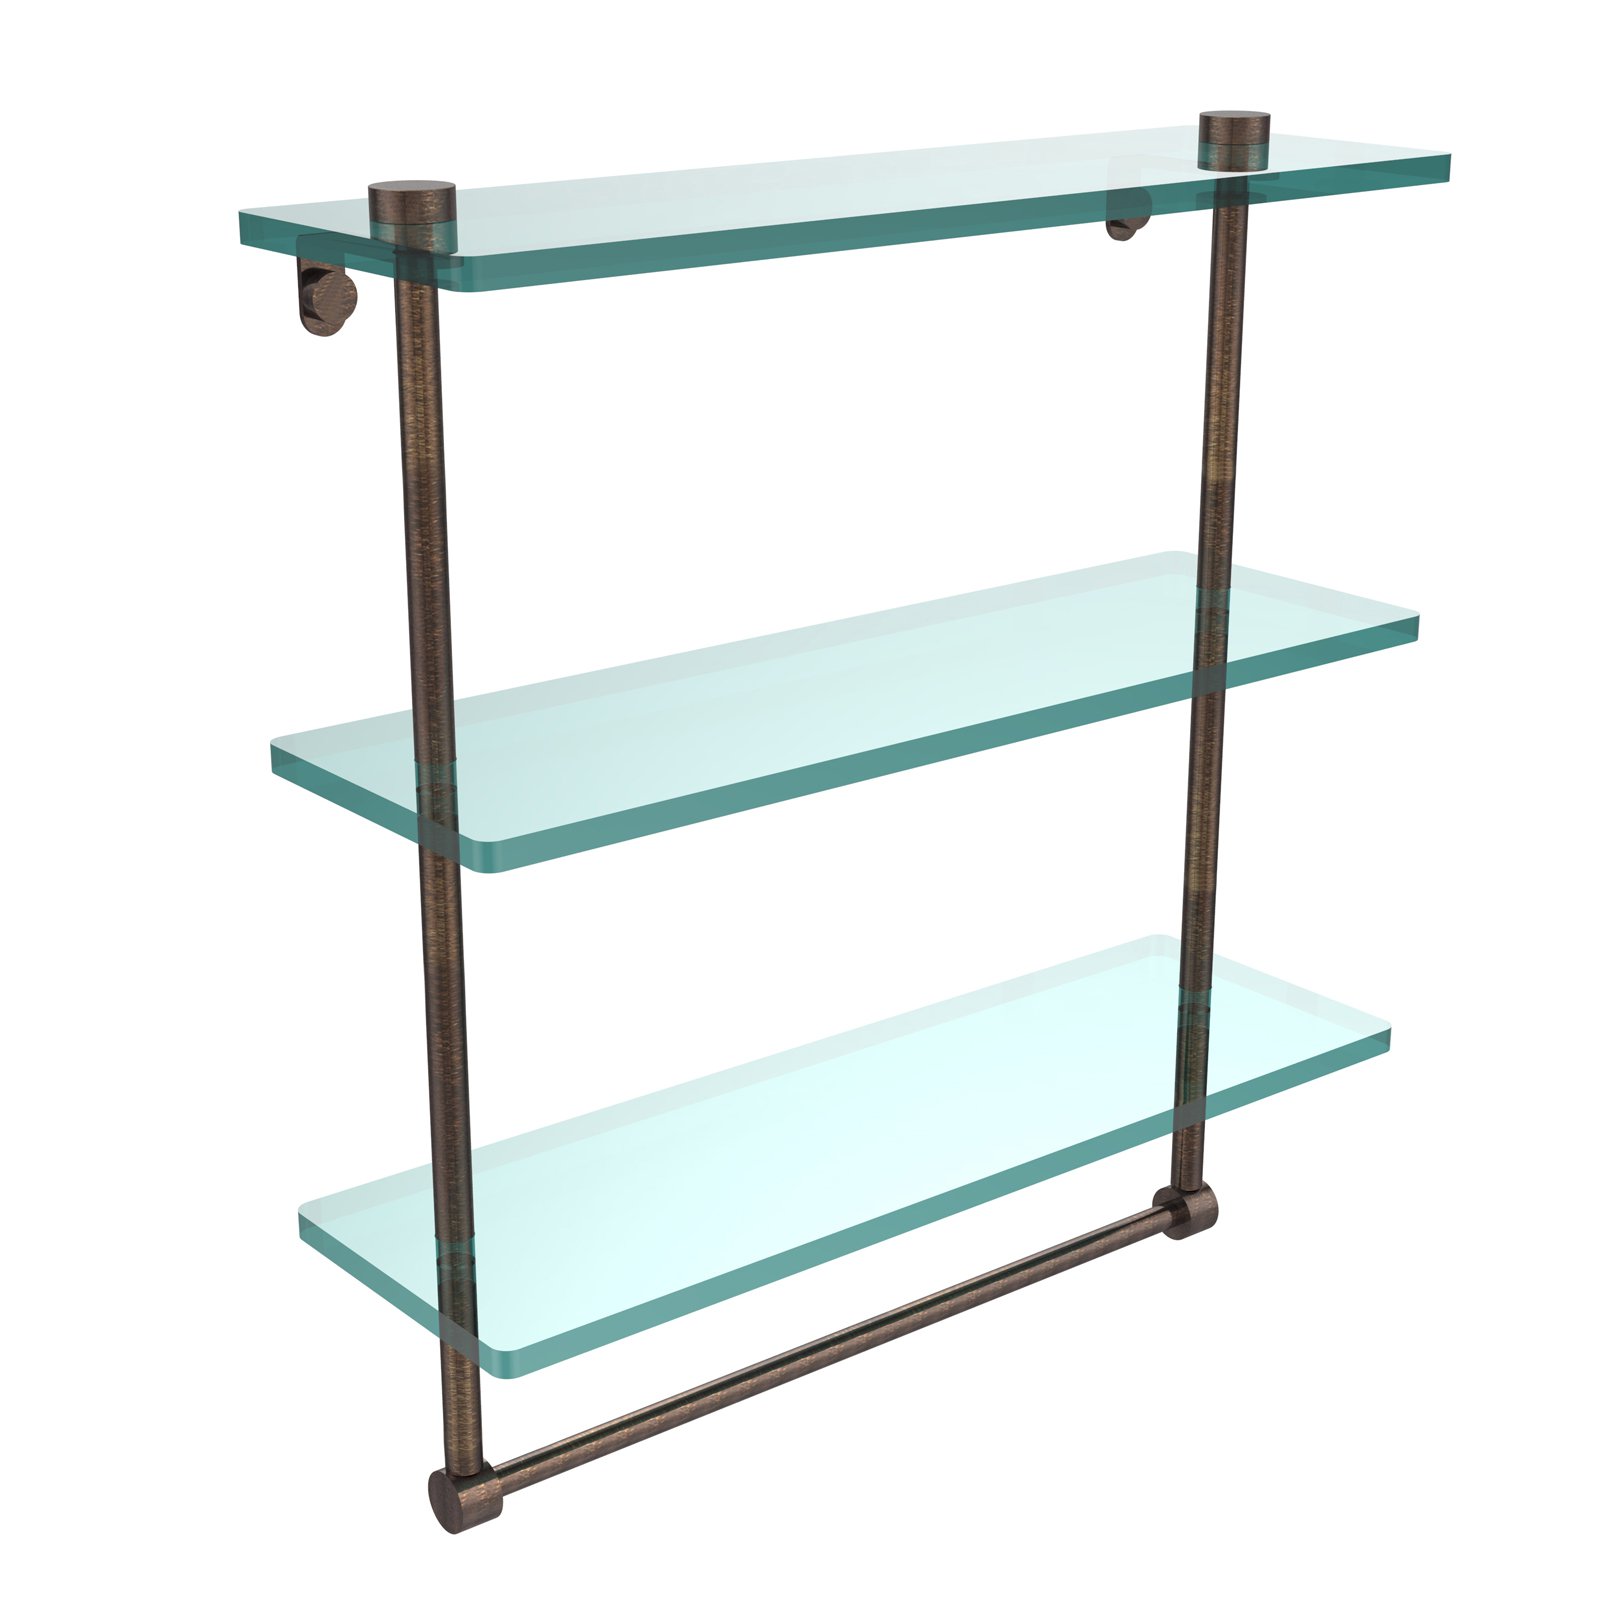 16-in Triple Tiered Glass Shelf with Integrated Towel Bar in Polished Nickel - image 1 of 5